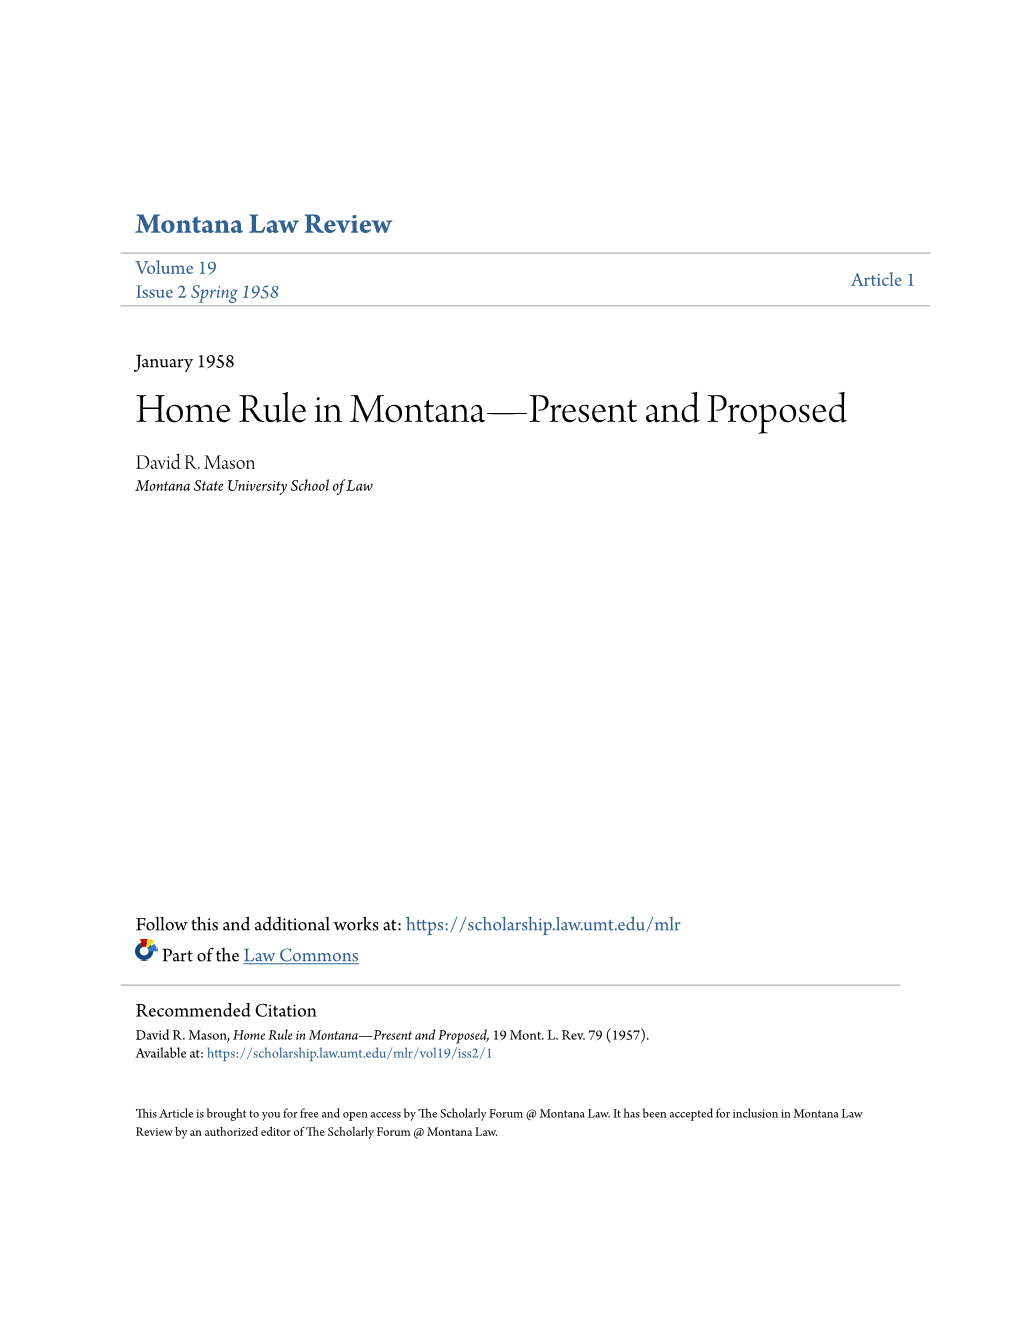 Home Rule in Montanaâ•Flpresent and Proposed